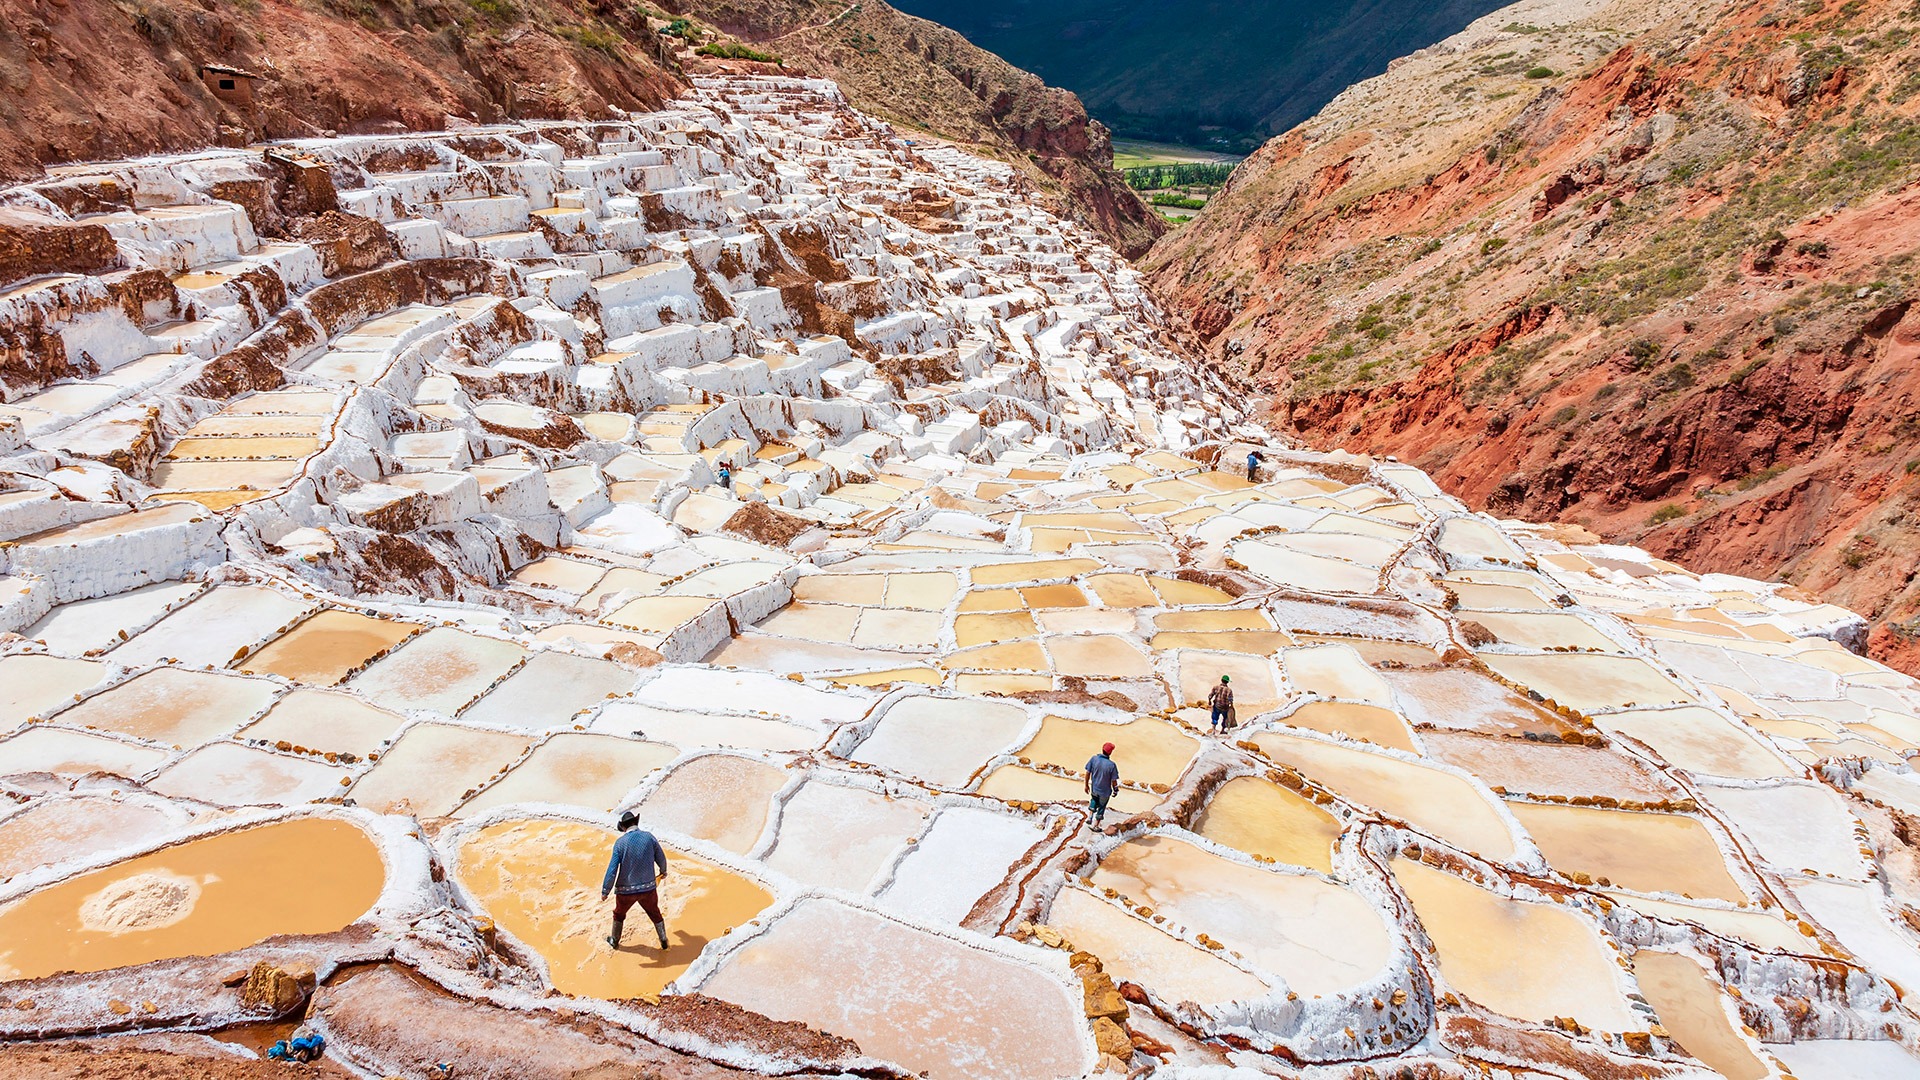 Workers at the salt flats near Maras, Sacred Valley, Peru